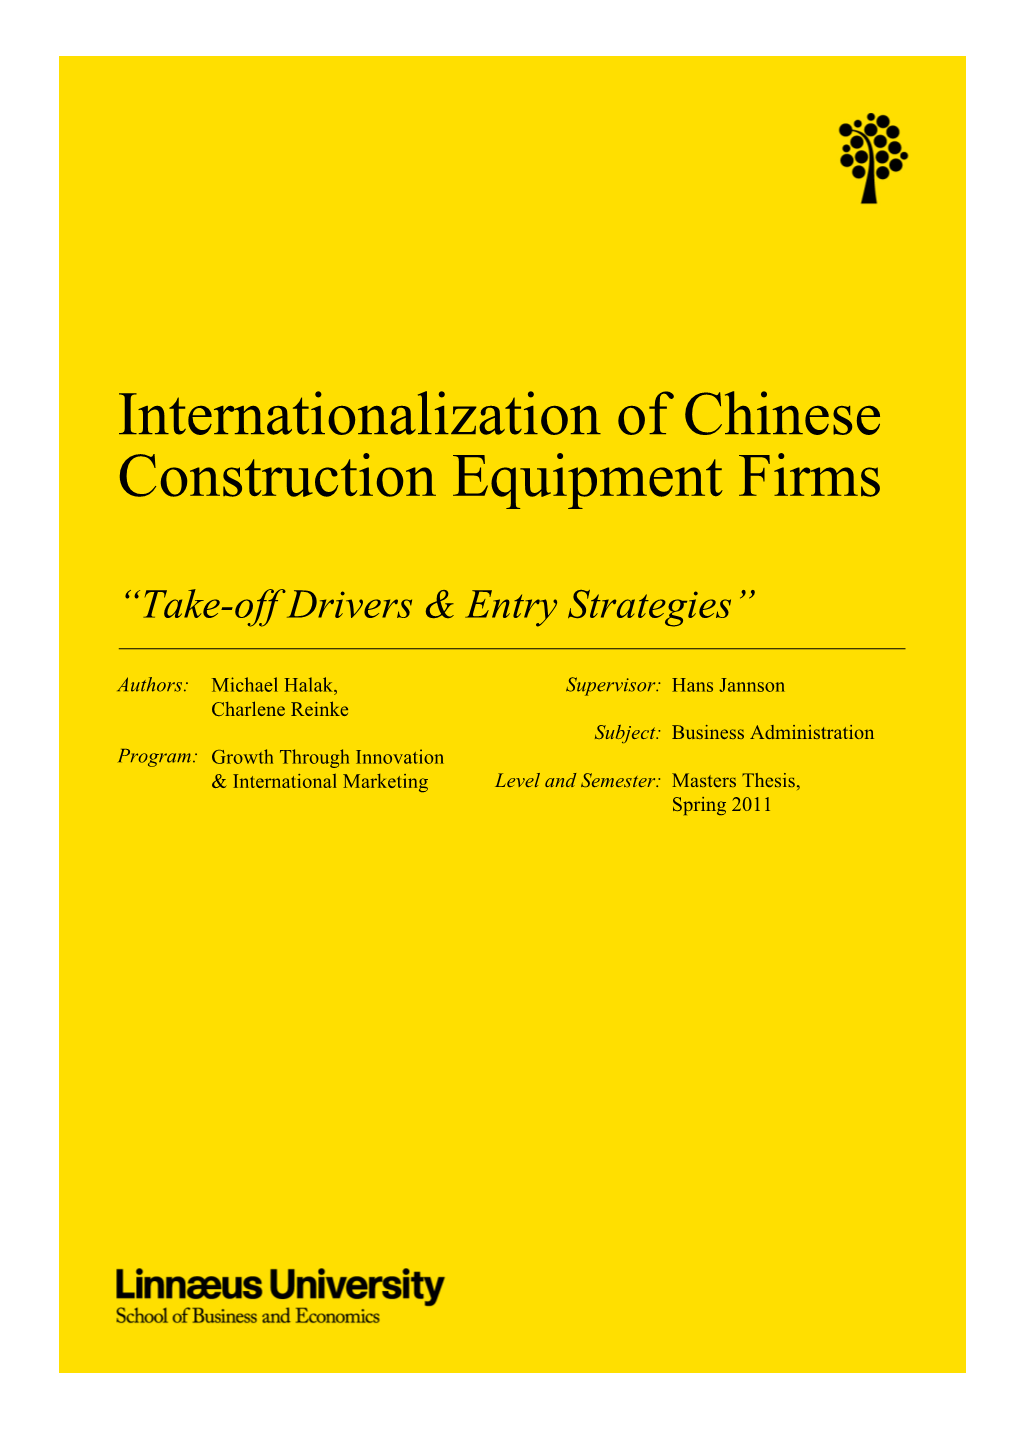 Internationalization of Chinese Construction Equipment Firms